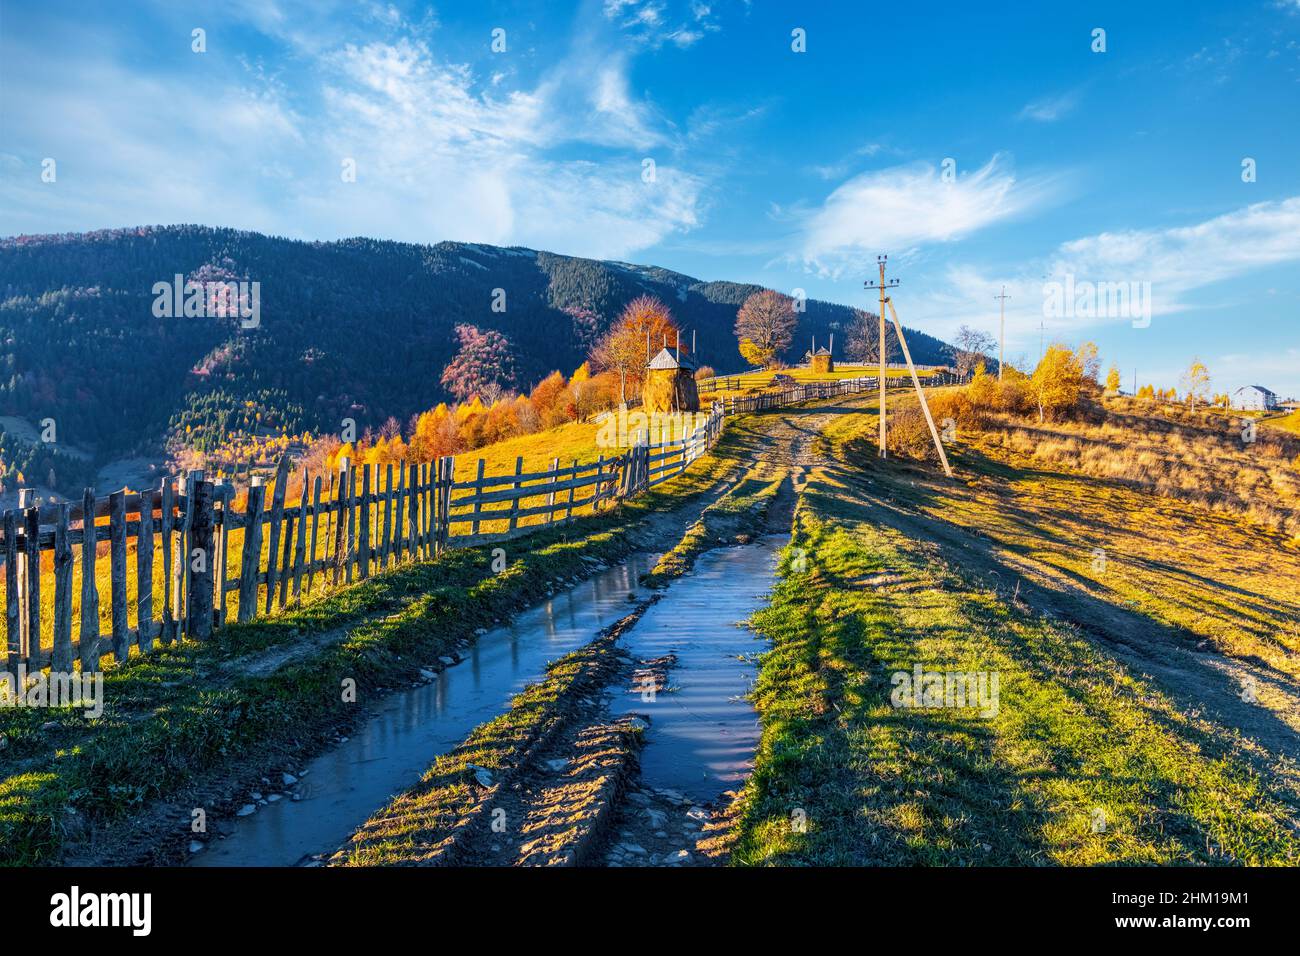 Ground road with dirty puddles after rain runs along wooden fence near highland village against forestry mountains on sunny autumn day Stock Photo